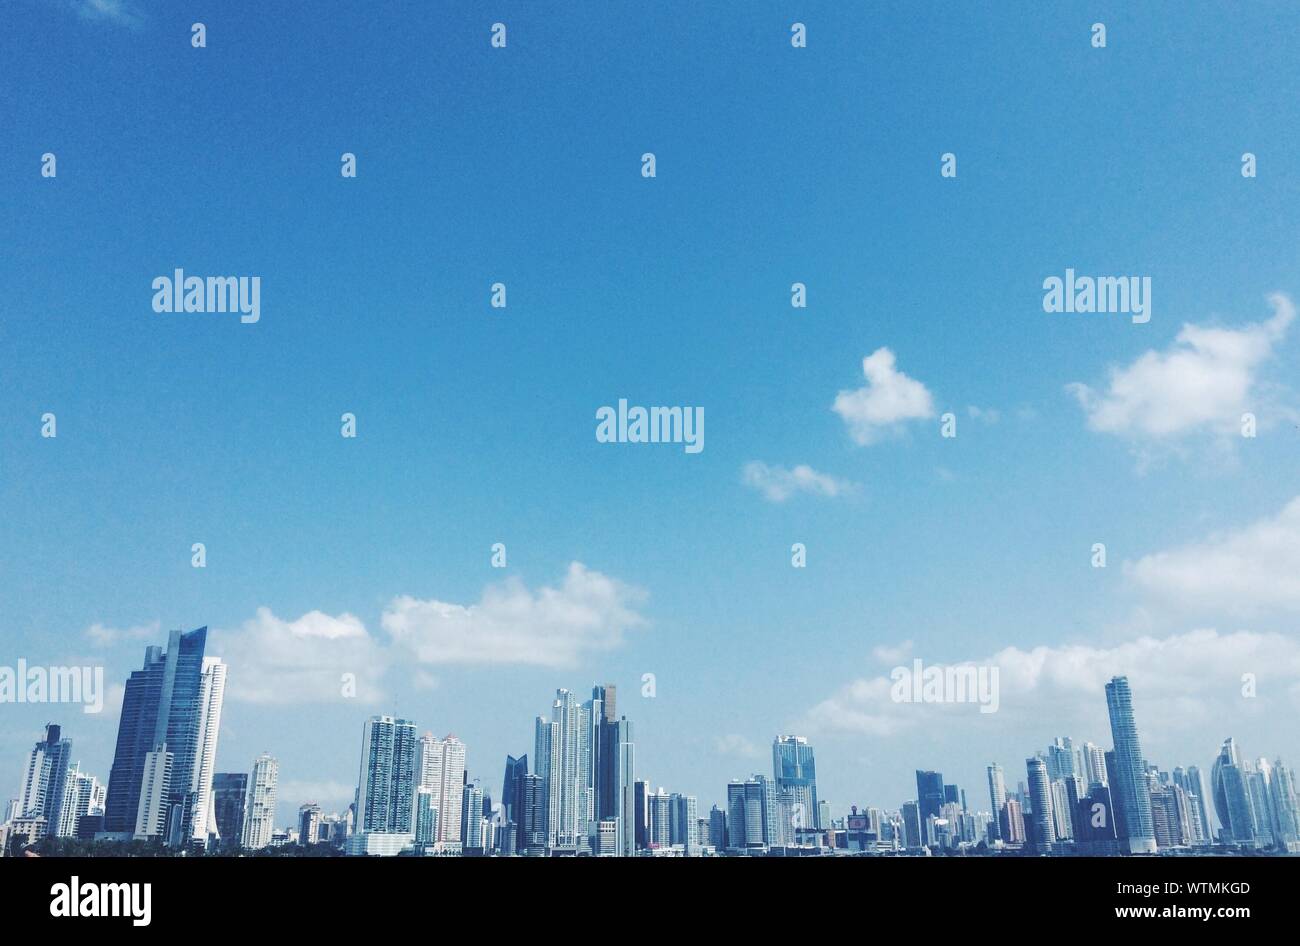 View Of Skylines In City Stock Photo